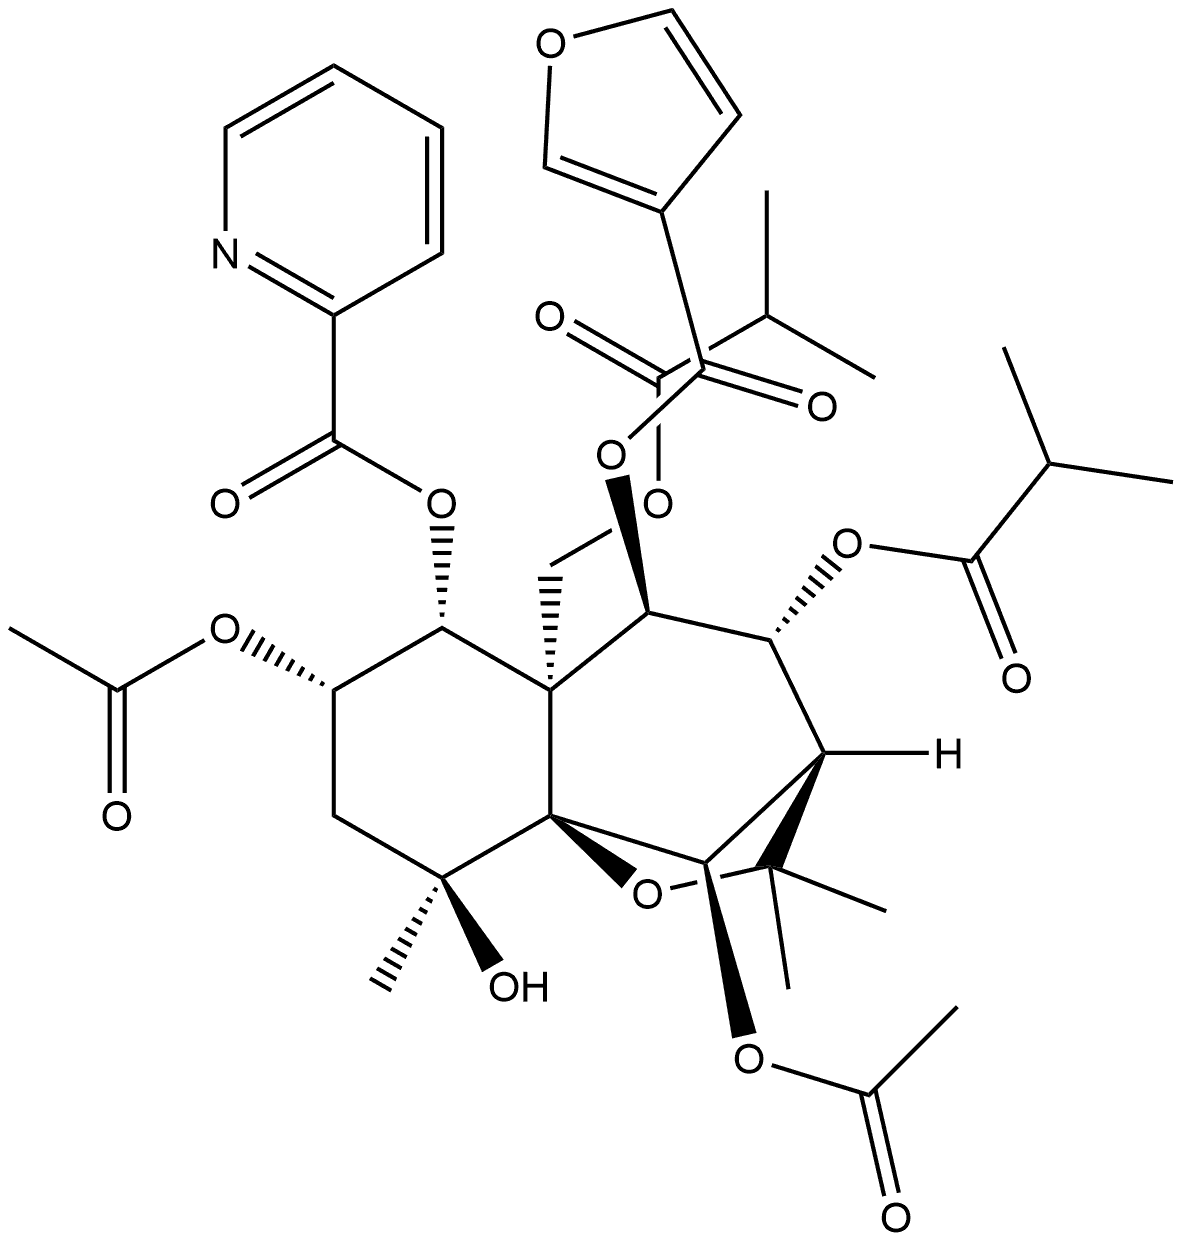 2-Pyridinecarboxylic acid, (3R,4R,5R,5aS,6R,7S,9S,9aS,10R)-7,10-bis(acetyloxy)-5-[(3-furanylcarbonyl)oxy]octahydro-9-hydroxy-2,2,9-trimethyl-4-(2-methyl-1-oxopropoxy)-5a-[(2-methyl-1-oxopropoxy)methyl]-2H-3,9a-methano-1-benzoxepin-6-yl ester Structure